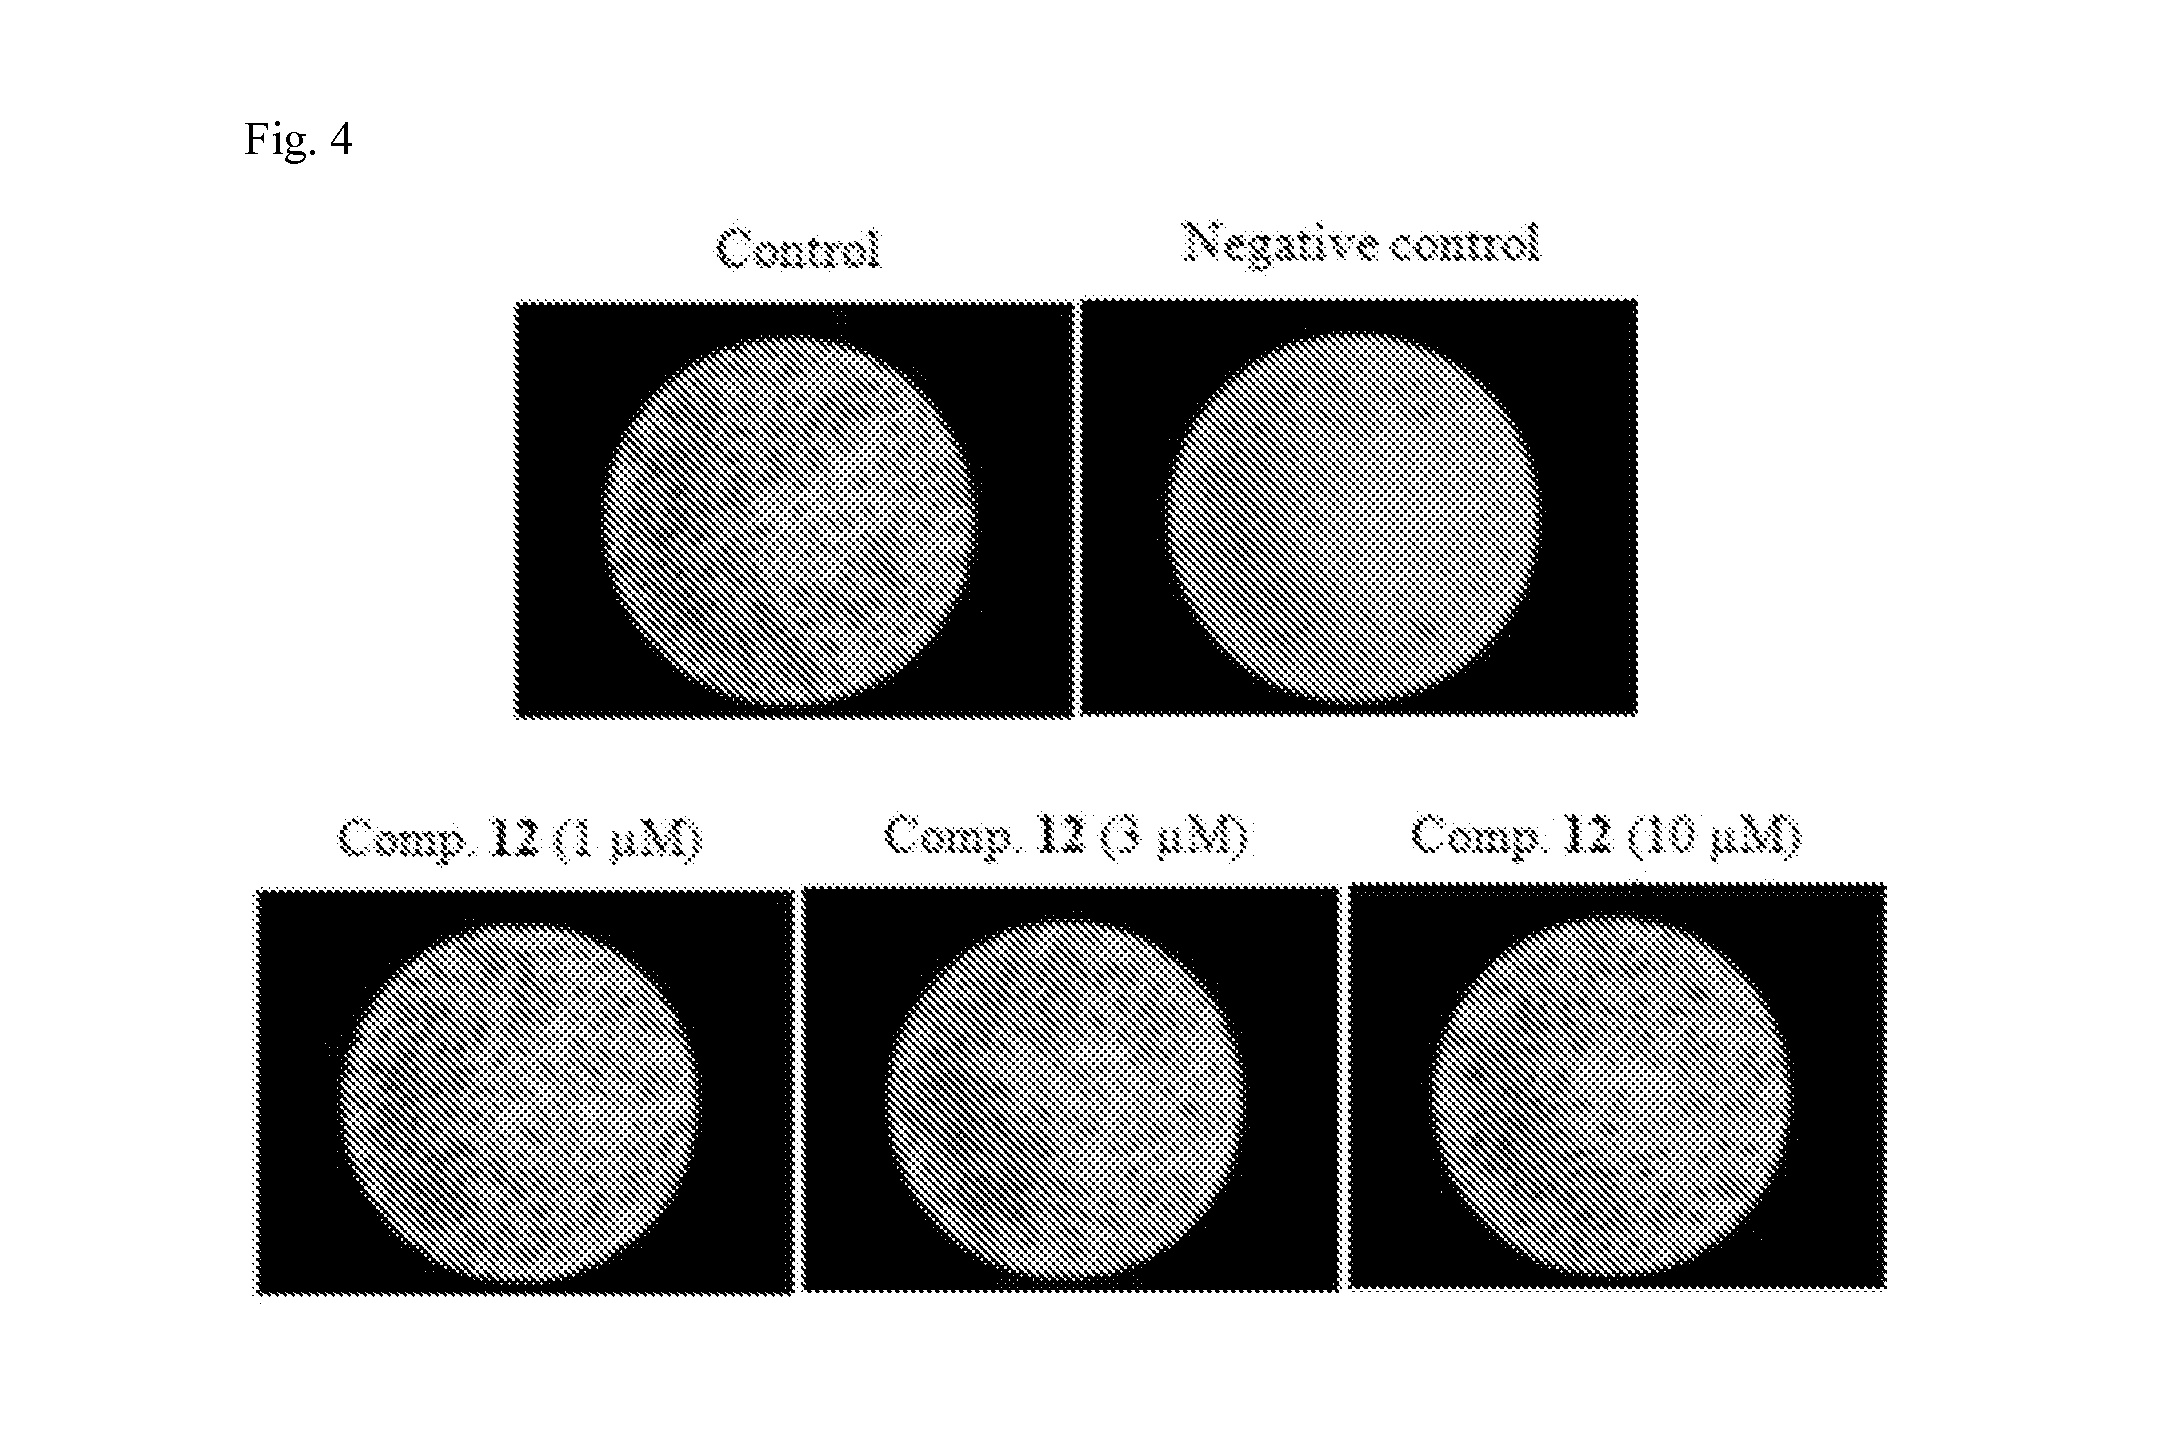 Pharmaceutical composition comprising bicyclic pyridinol derivatives for preventing or treating diseases caused by angiogenesis